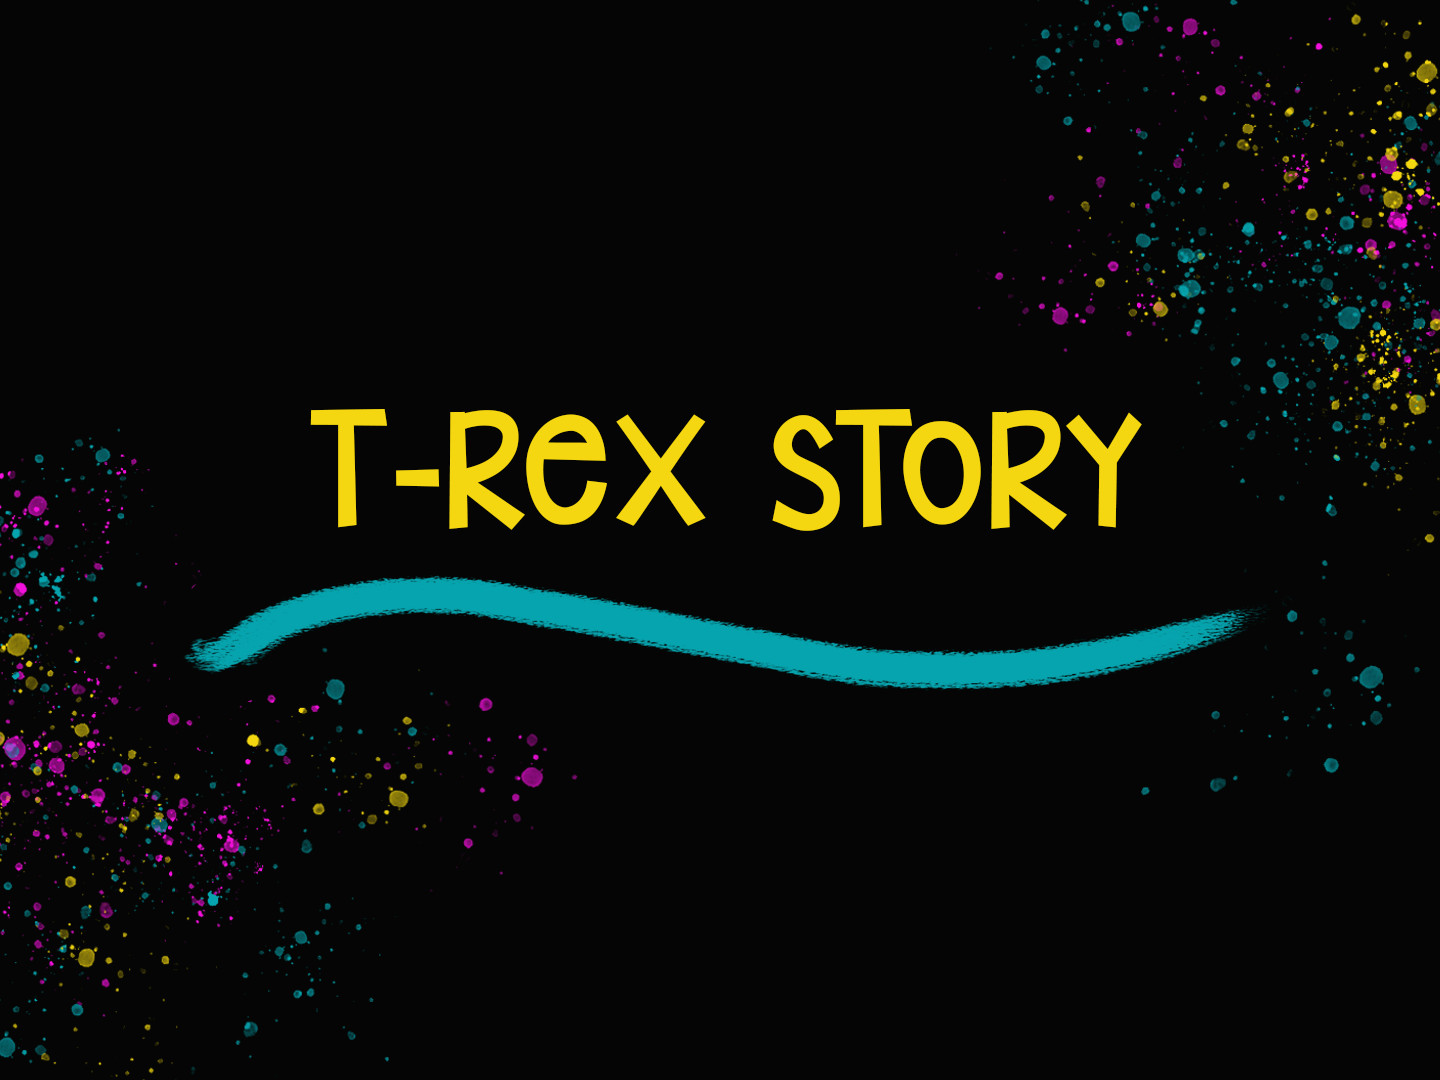 The T-Rex story